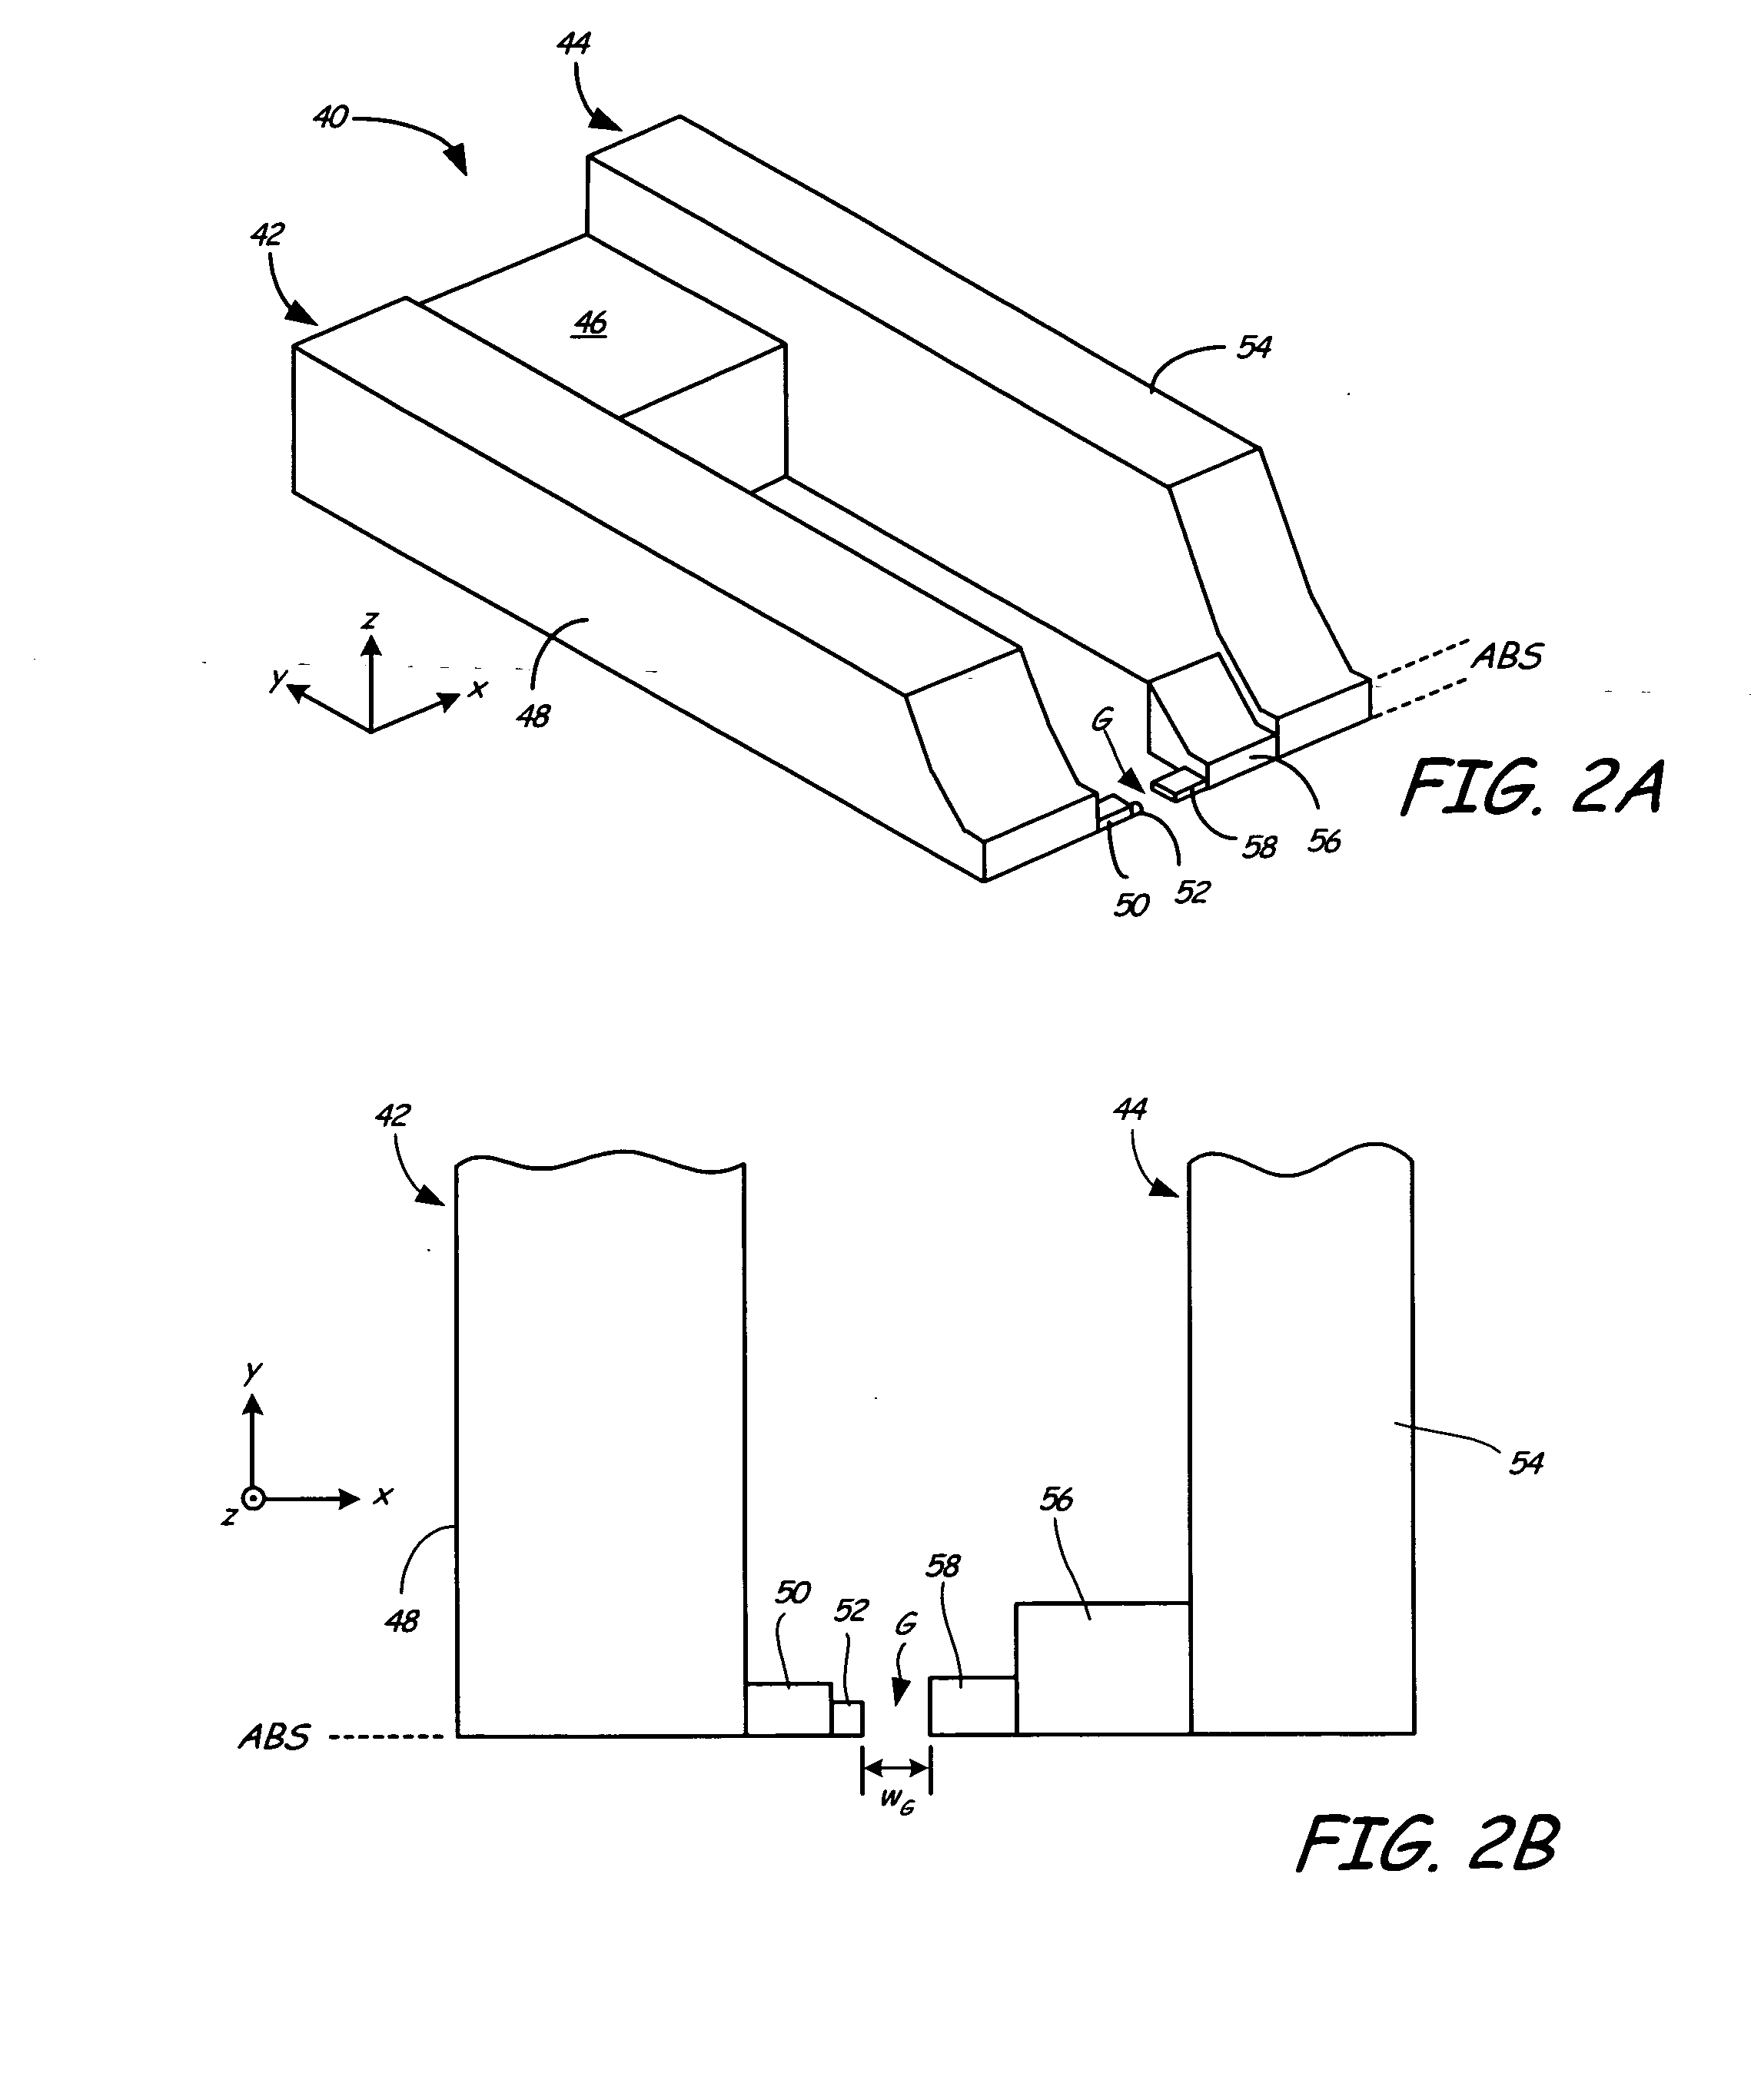 Integrated head for heat assisted magnetic recording